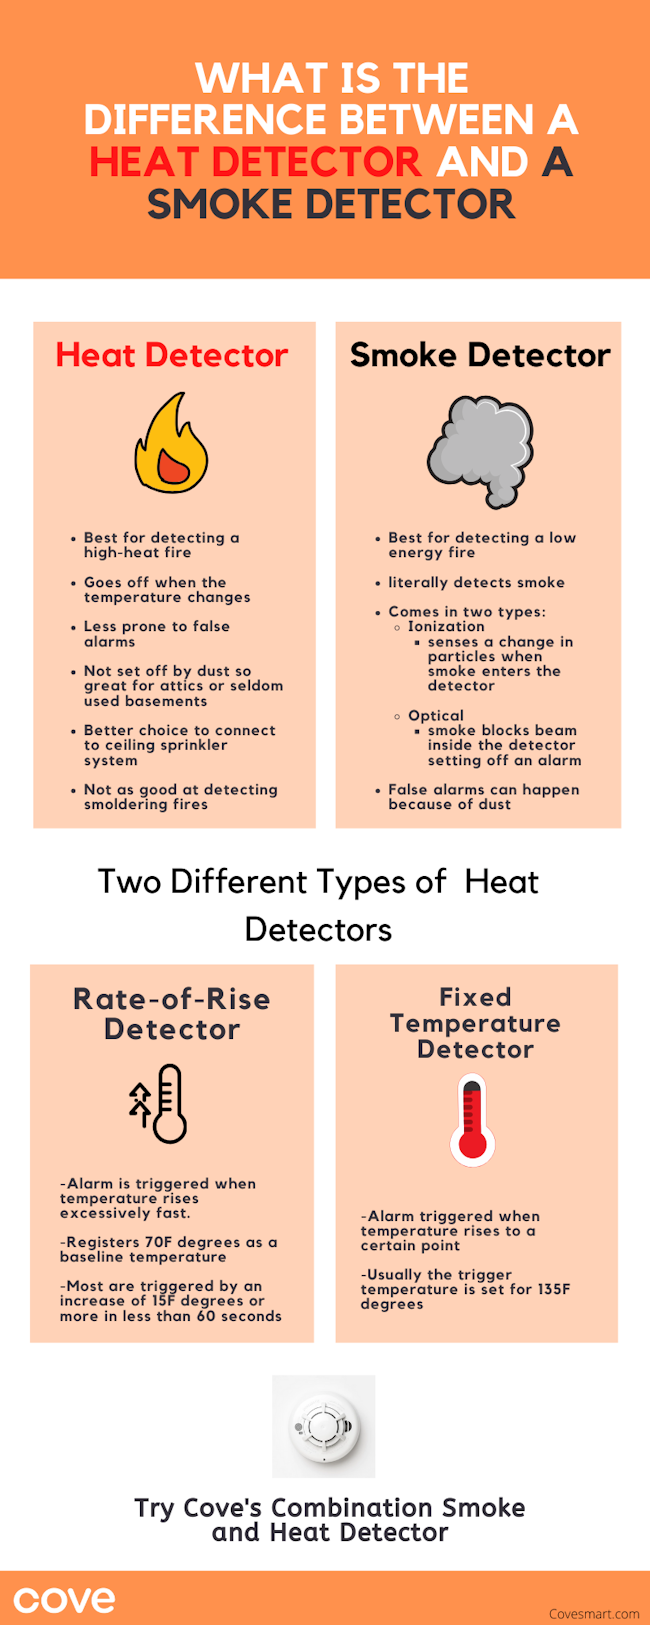 Description and images of the combination heat detector and smoke detector. Two types of heat detectors.